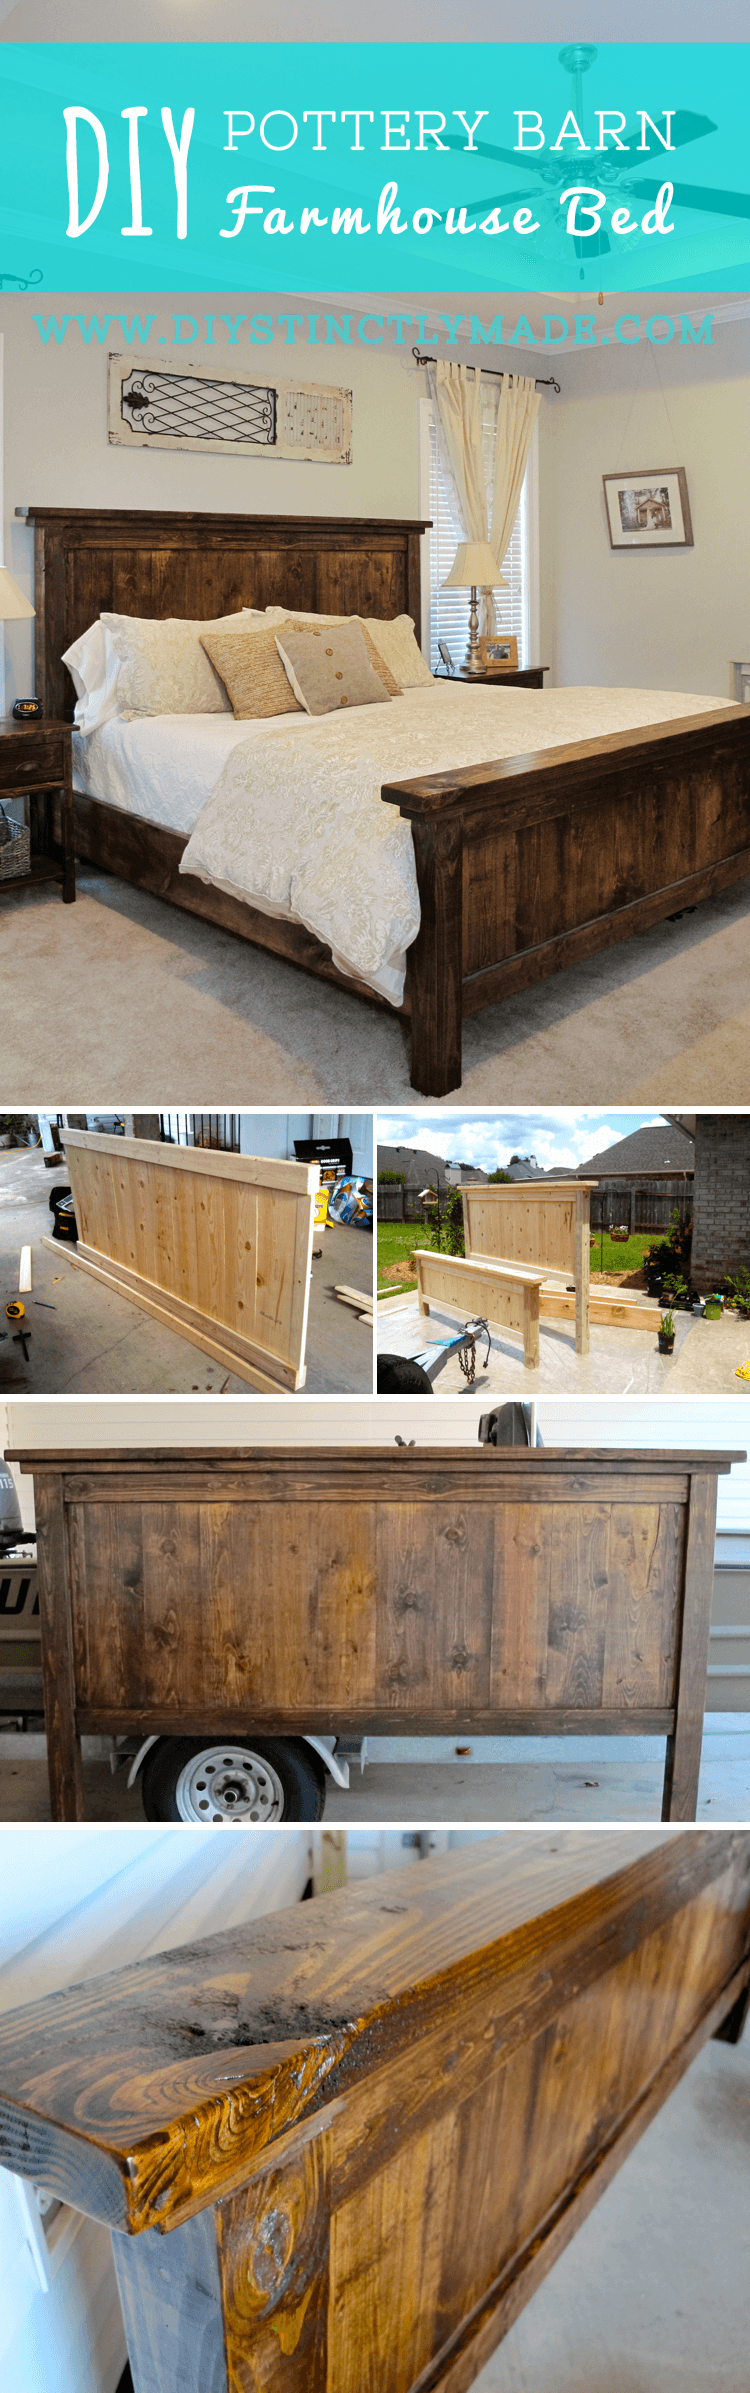 36 Easy Diy Bed Frame Projects To, Barn Wood Bed Frame Plans